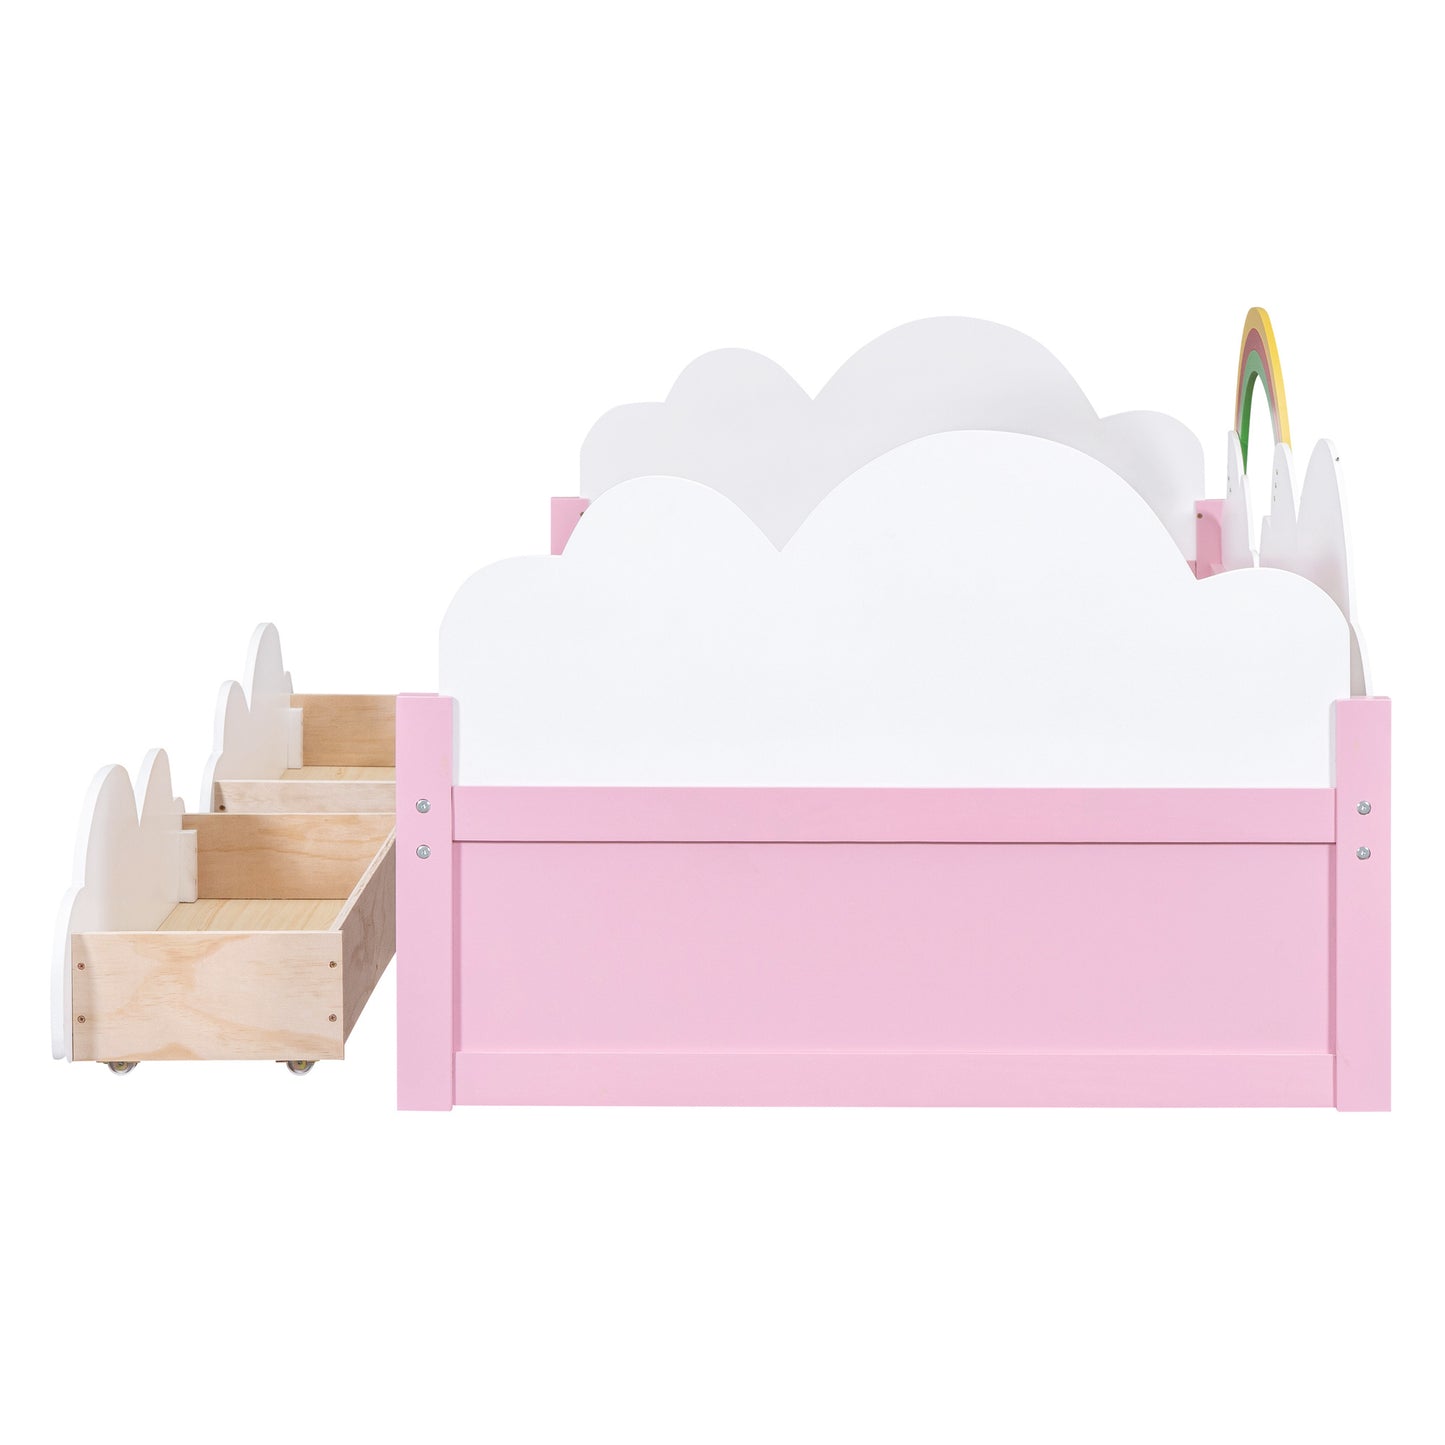 twin size bed with clouds and rainbow decor